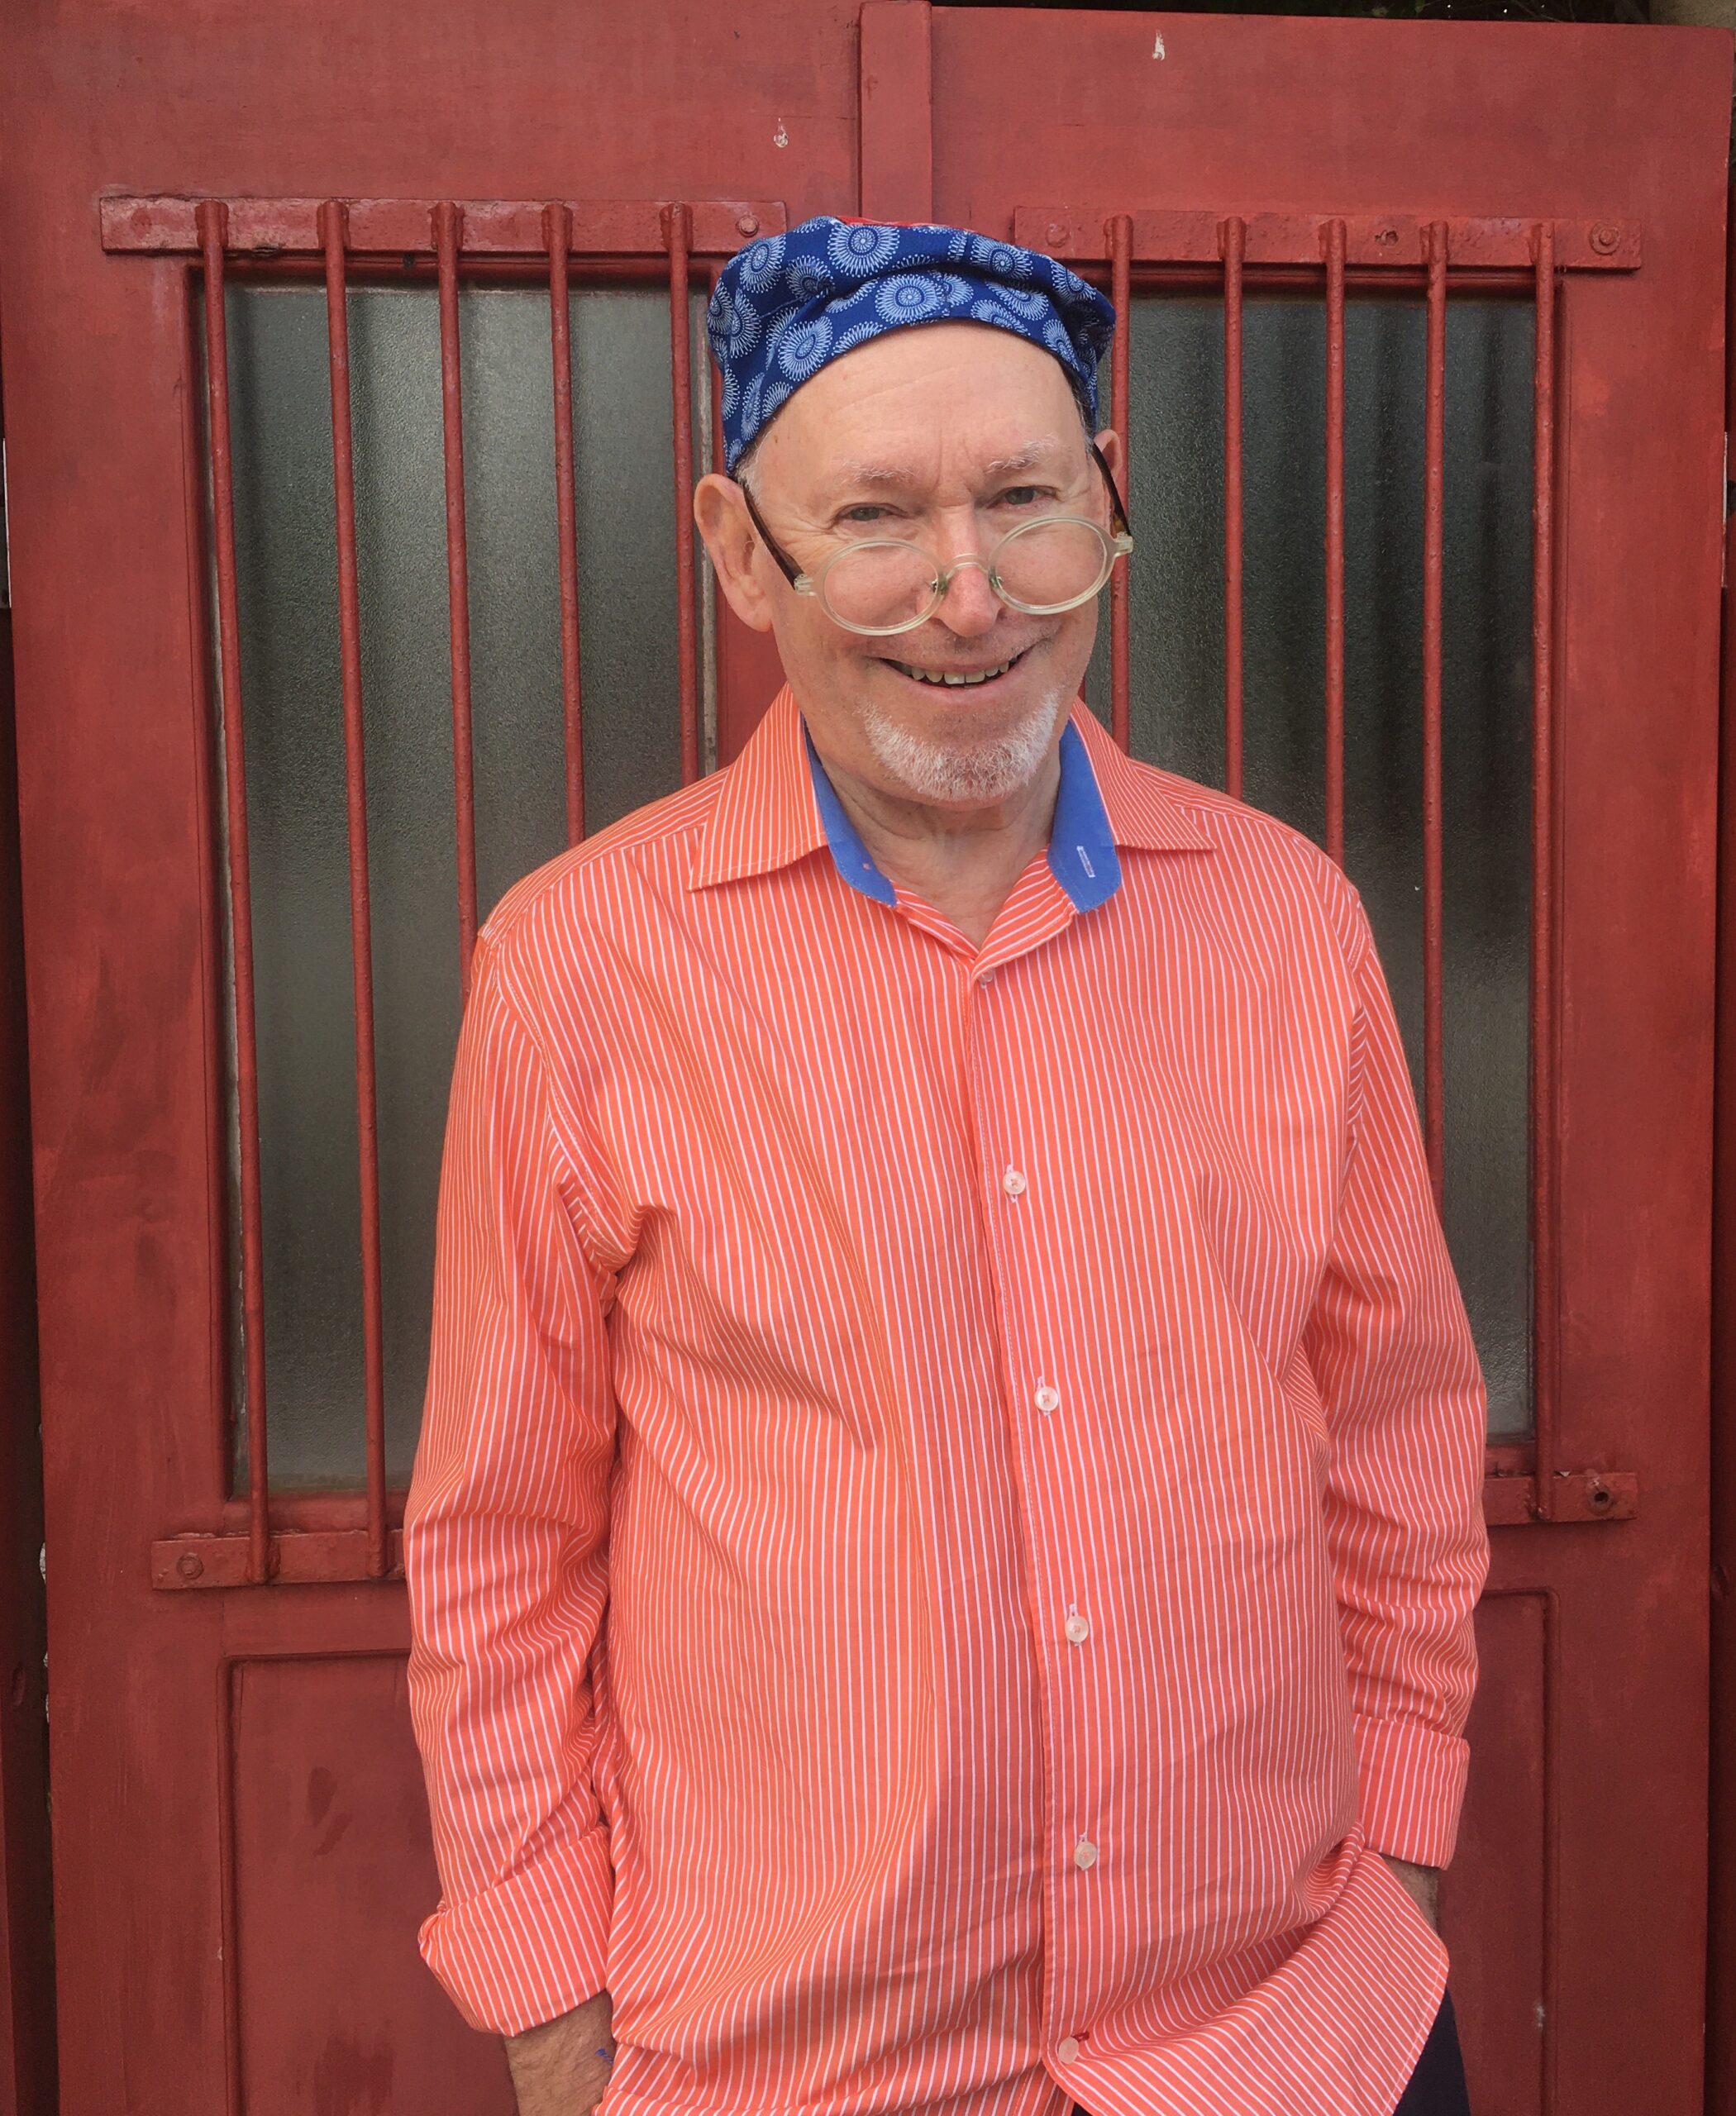 Niki Daly wears a salmon colored shirt and blue bandana standing in front of a wooden door. He smiles at the camera with his glasses perched low on his nose.